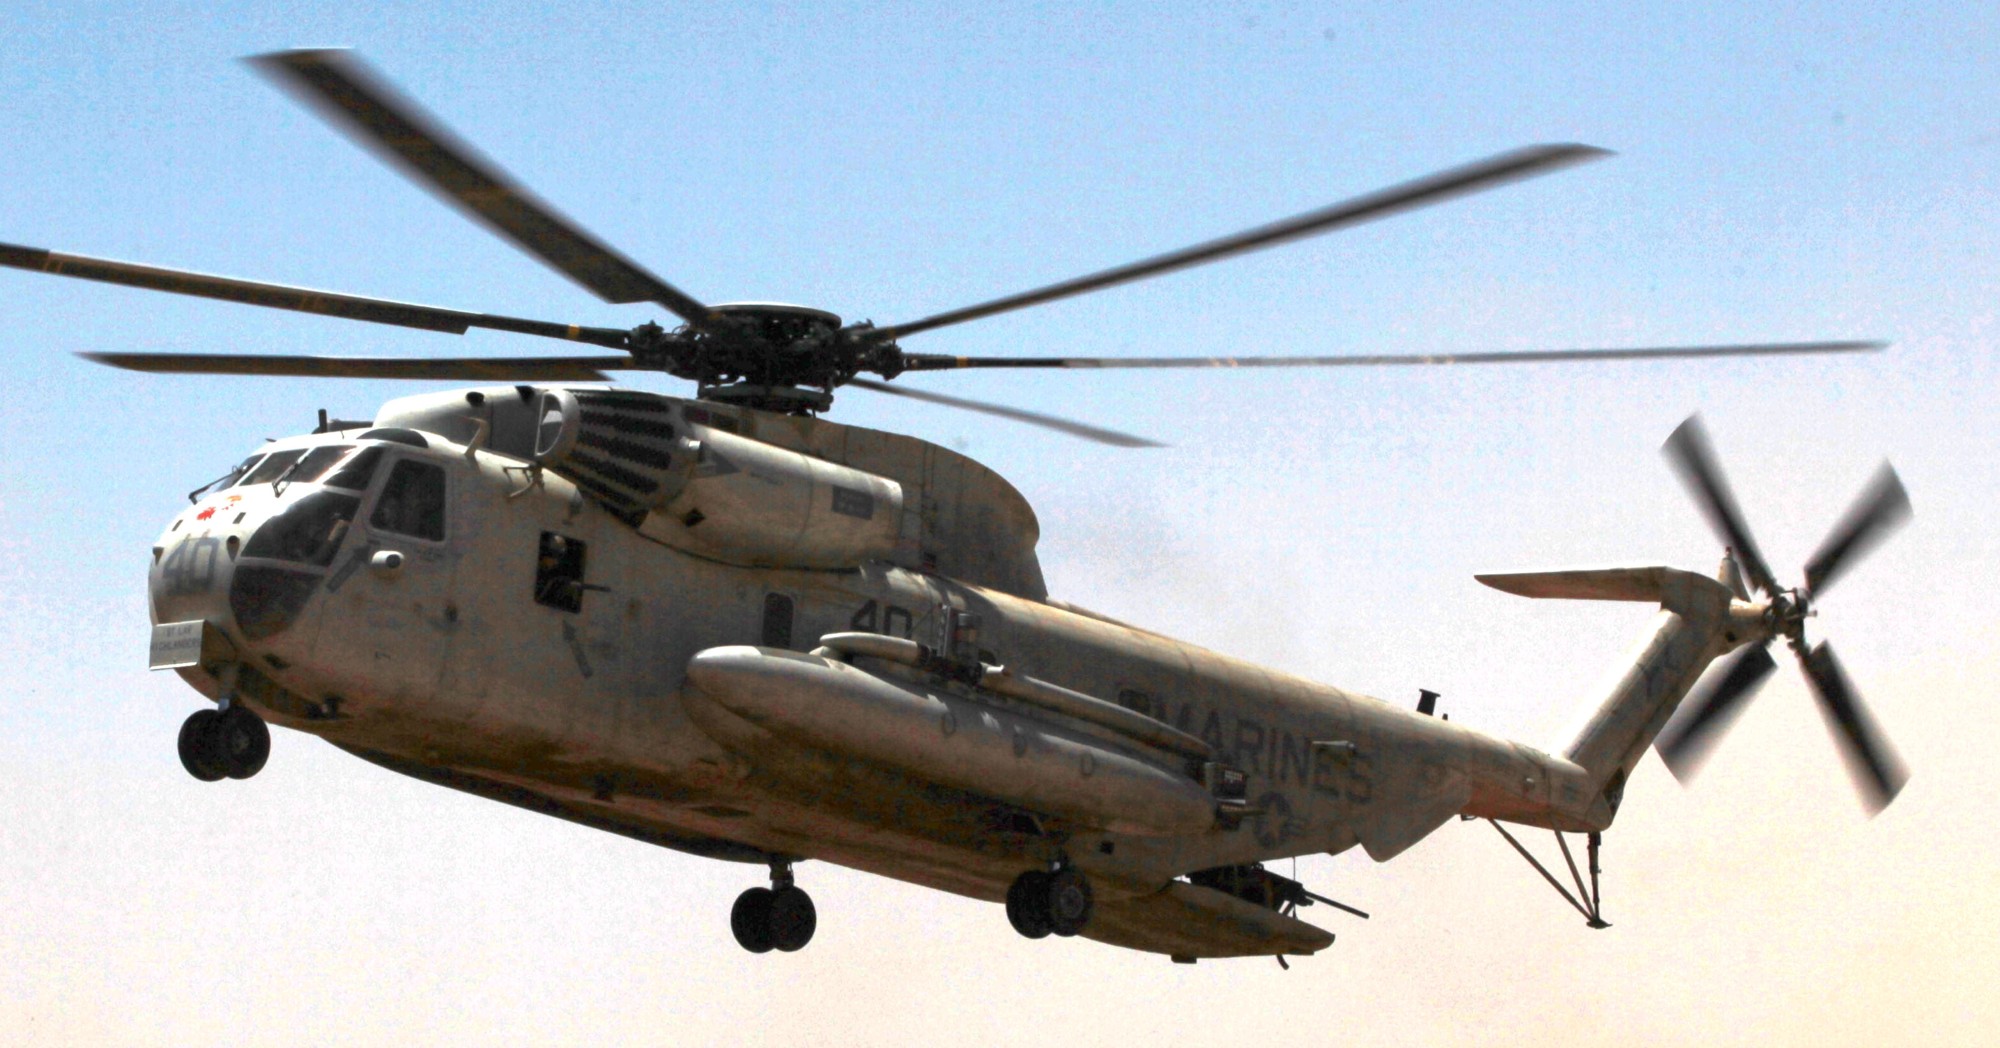 hmh-362 ugly angels marine heavy helicopter squadron usmc sikorsky ch-53d sea stallion 15 helmand province